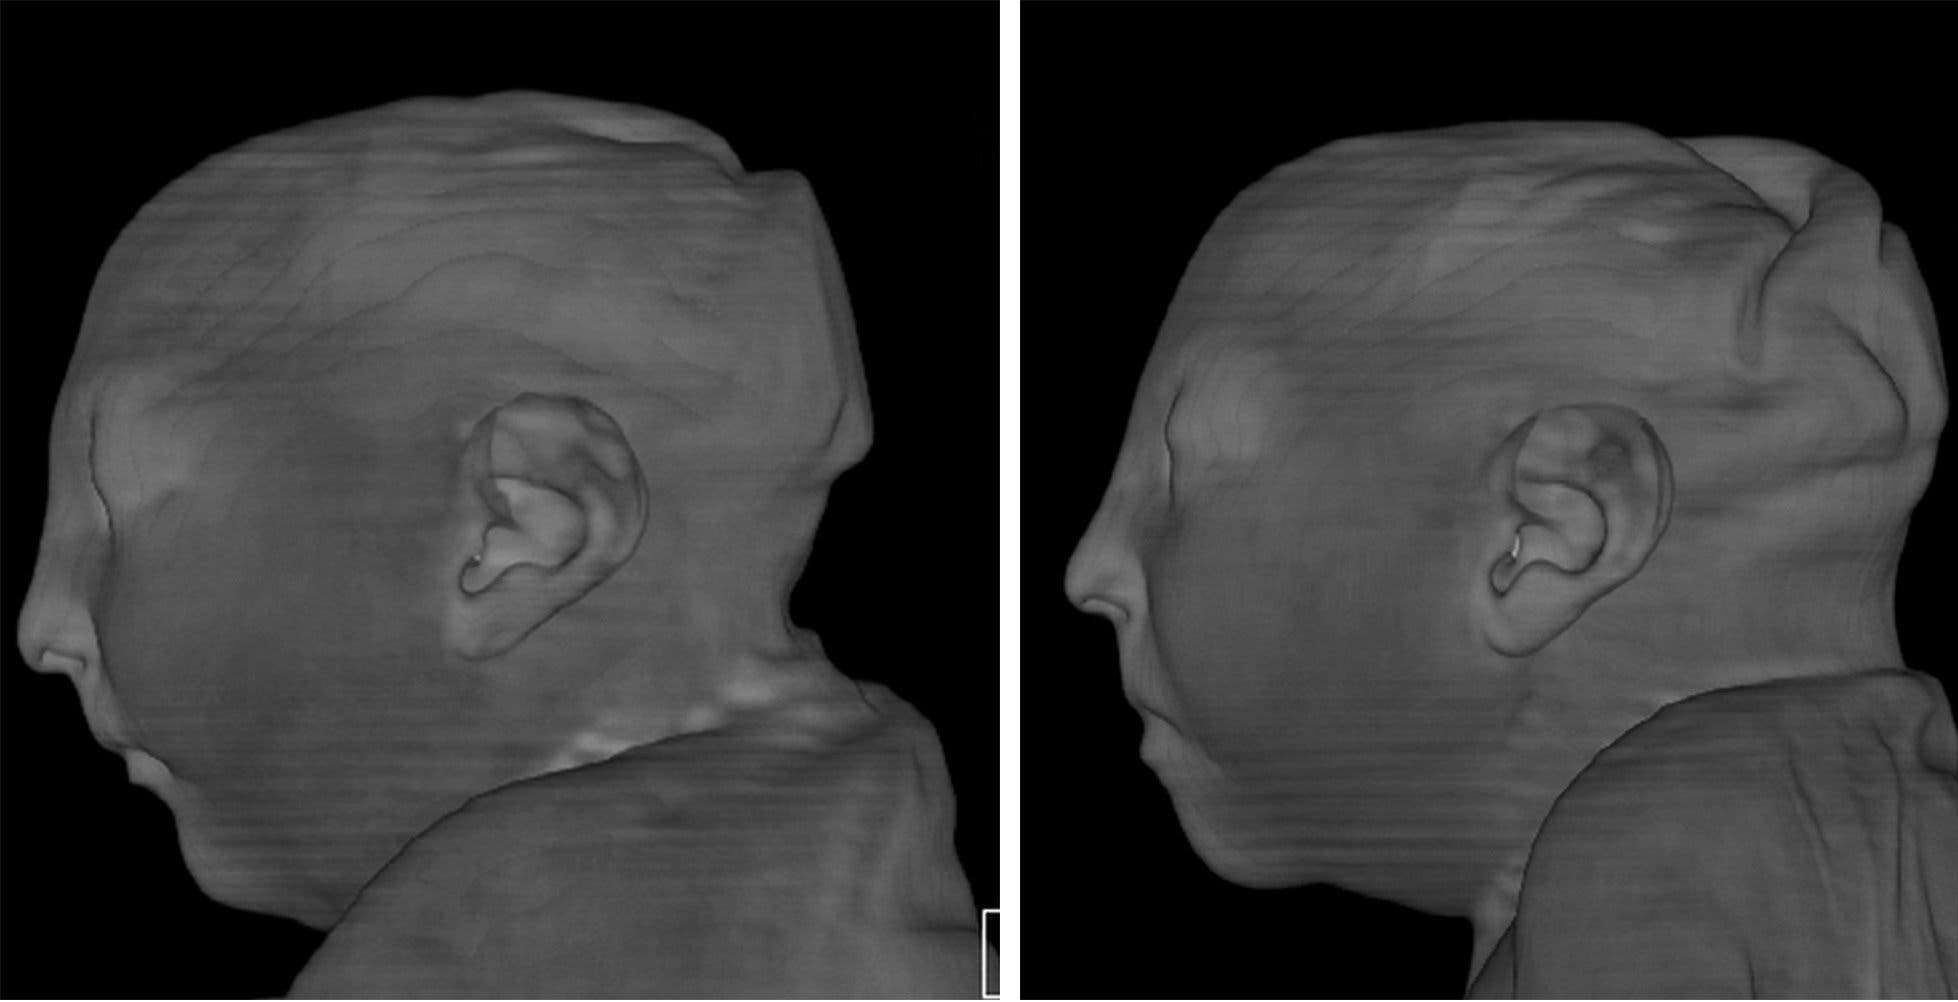 The heads of two twin girls whose mother was infected with Zika during pregnancy. Credit: Radiology